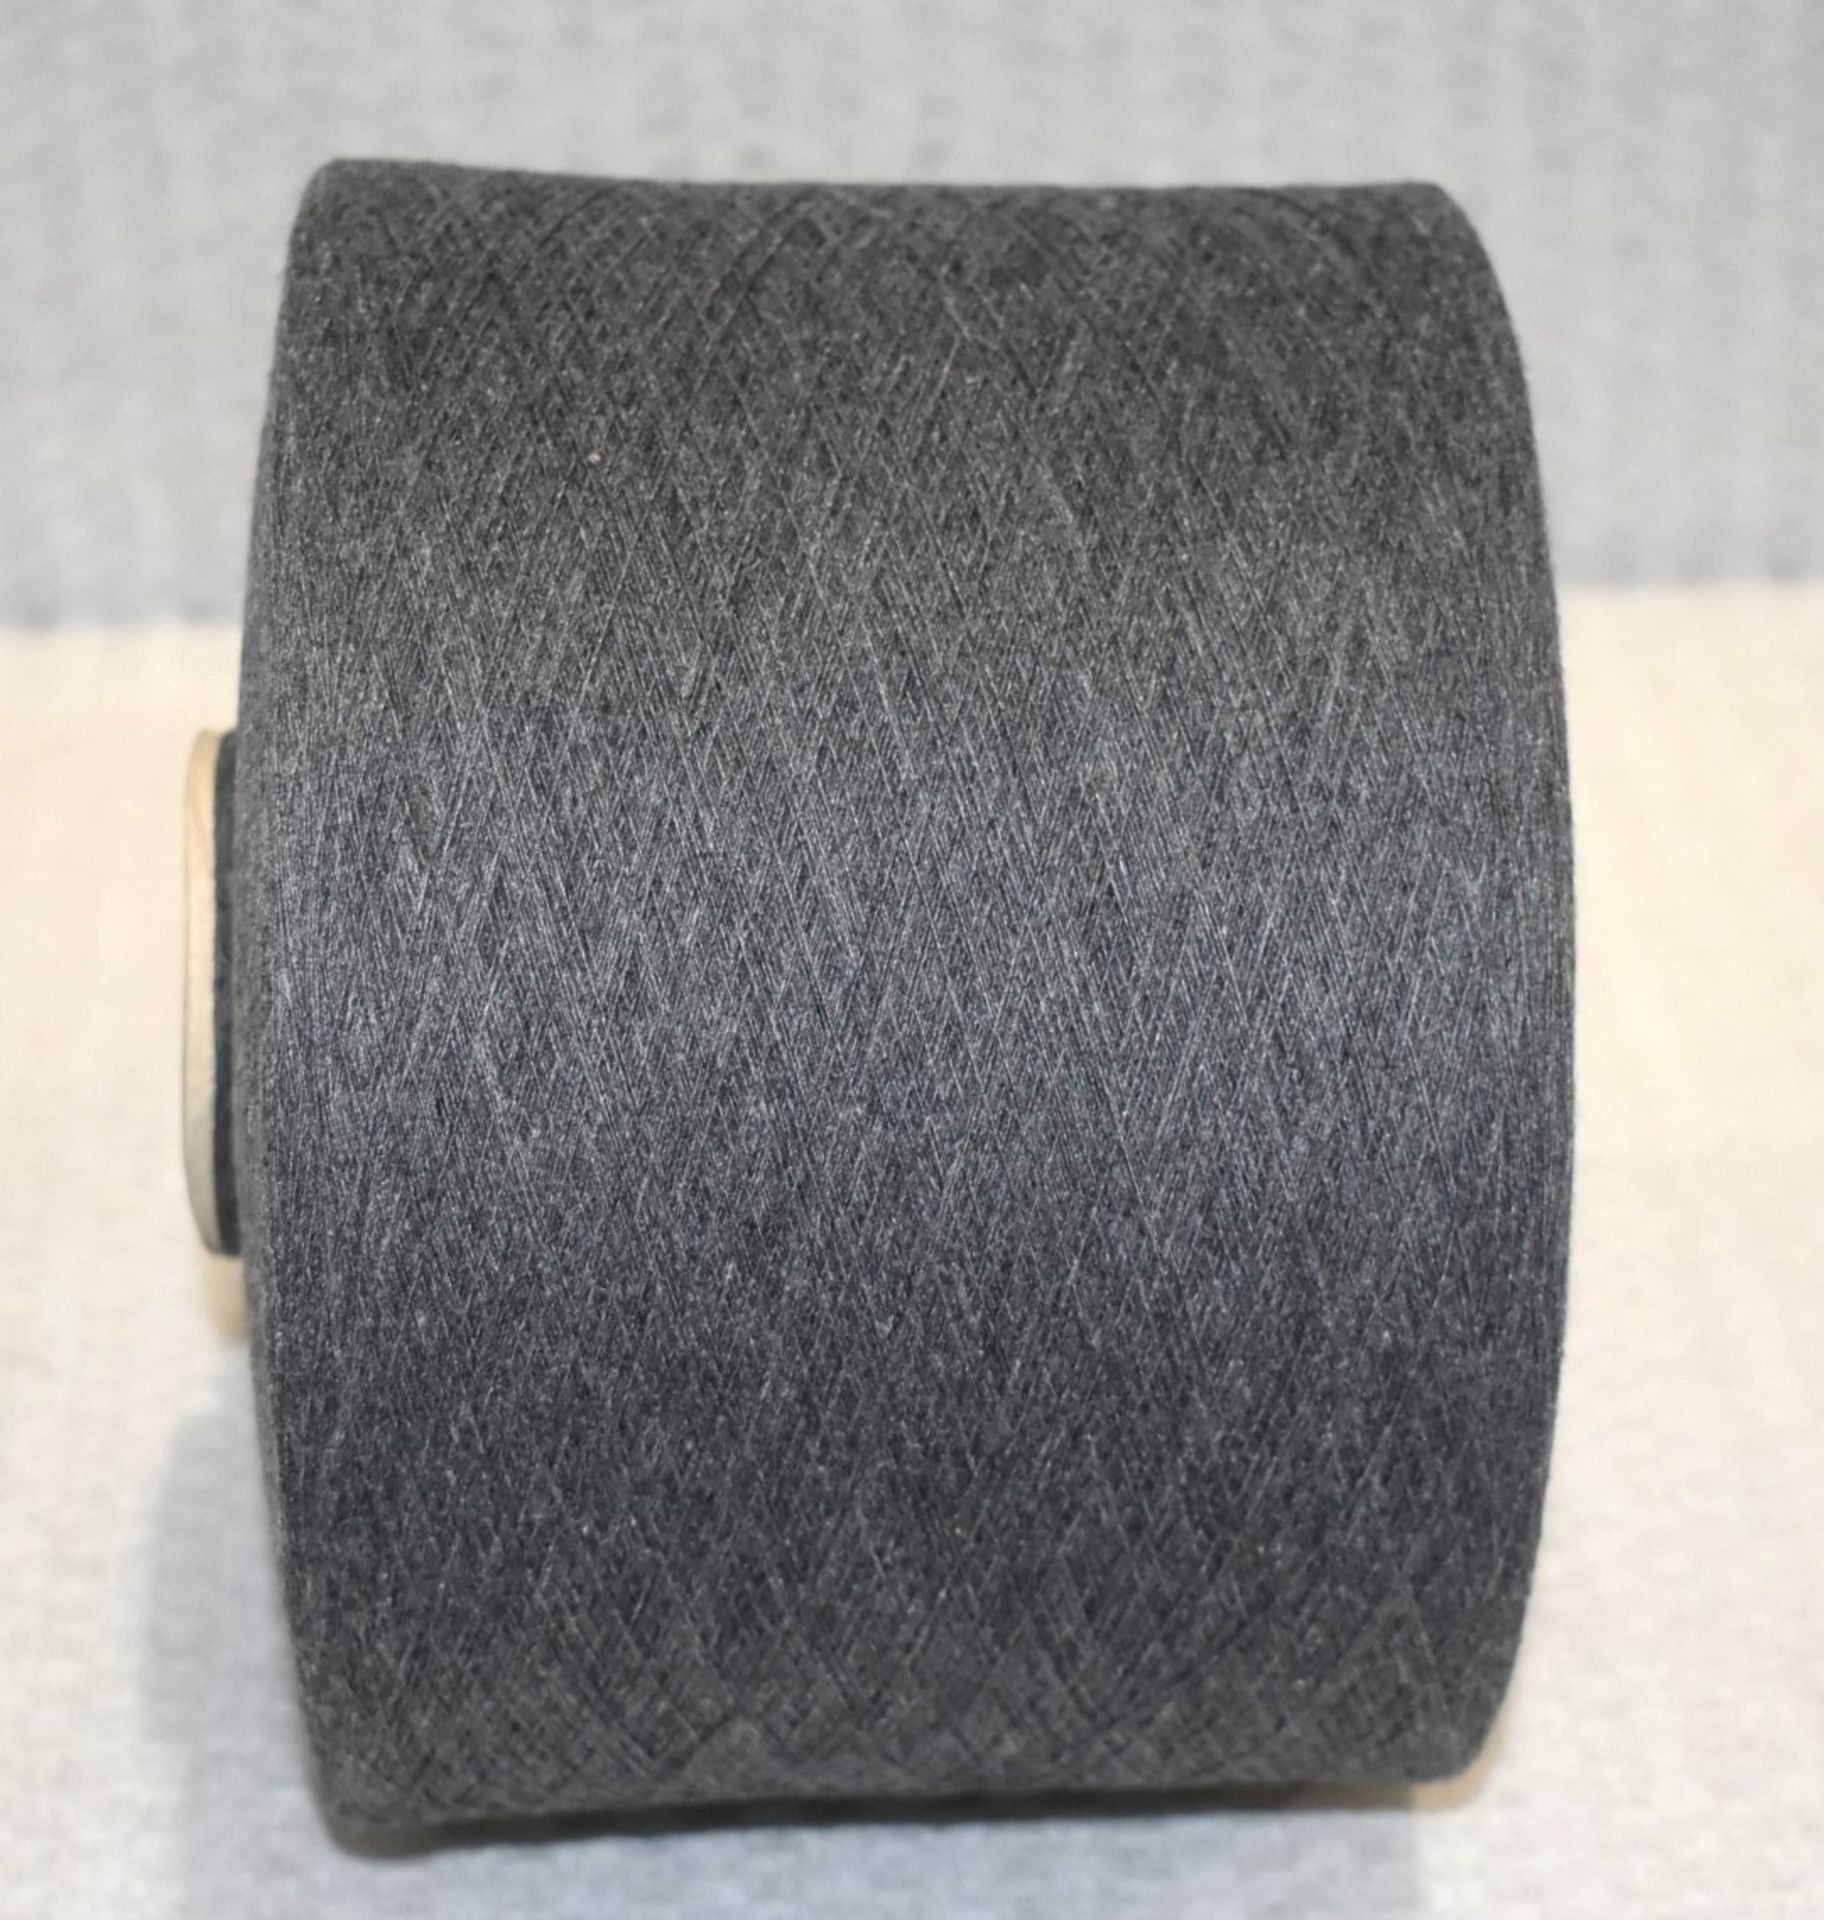 36 x Cones of 1/13 MicroCotton Knitting Yarn - Mid Grey - Approx Weight: 2,500g - New Stock ABL Yarn - Image 10 of 11